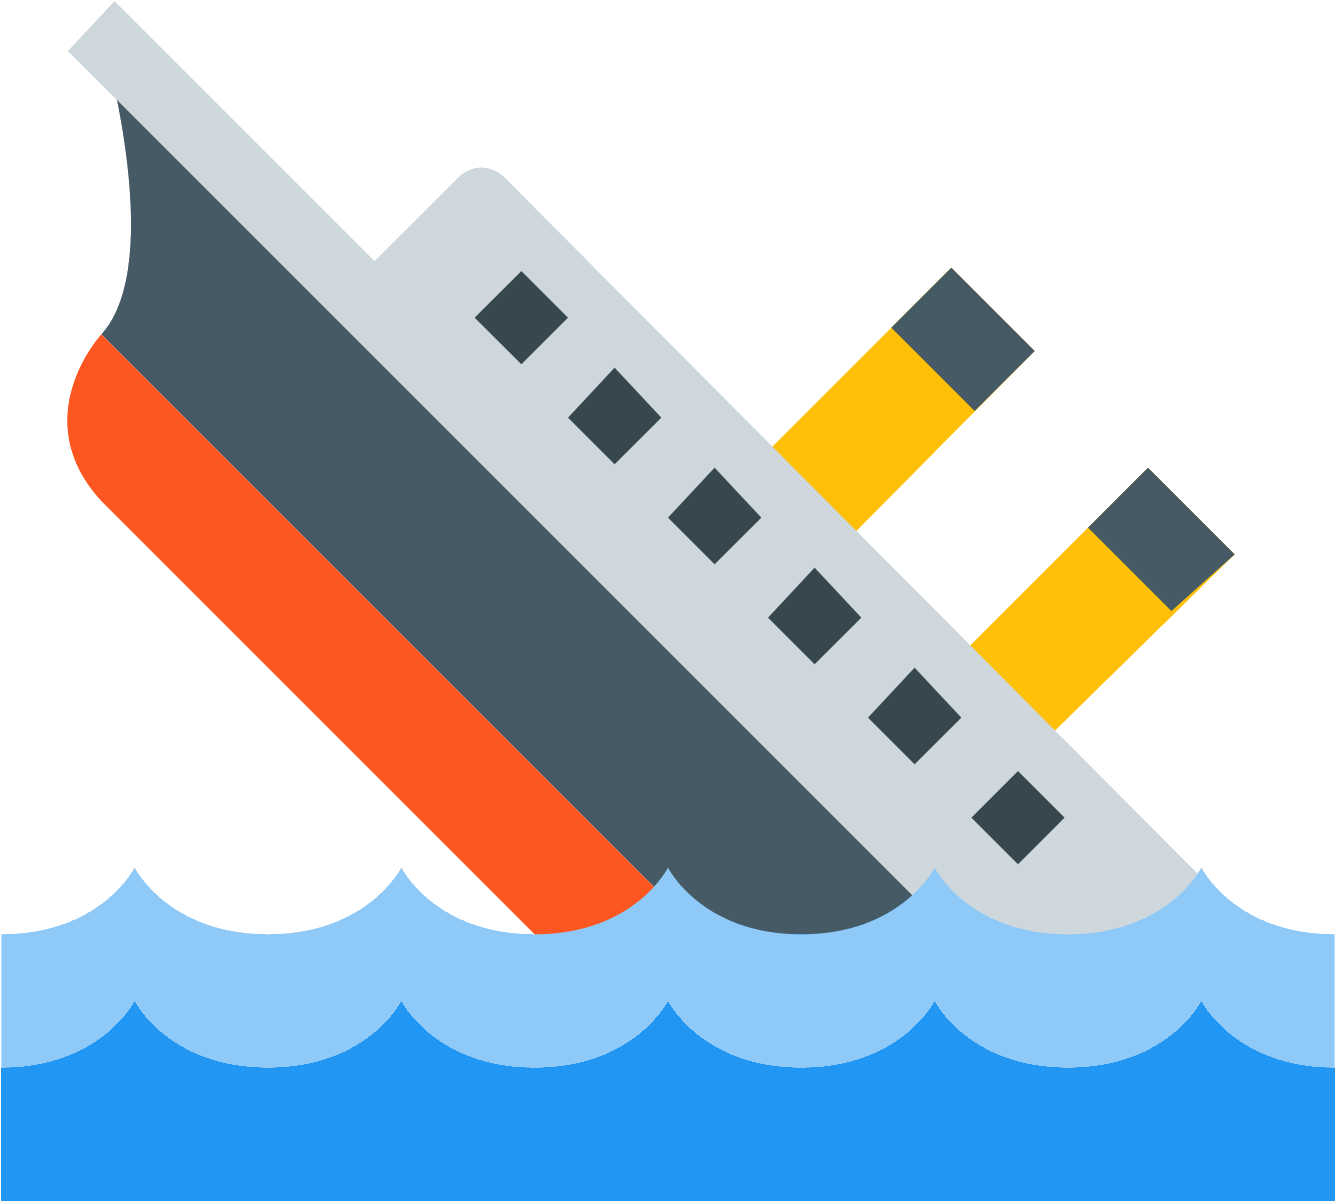 A Ship Sinking In The Water